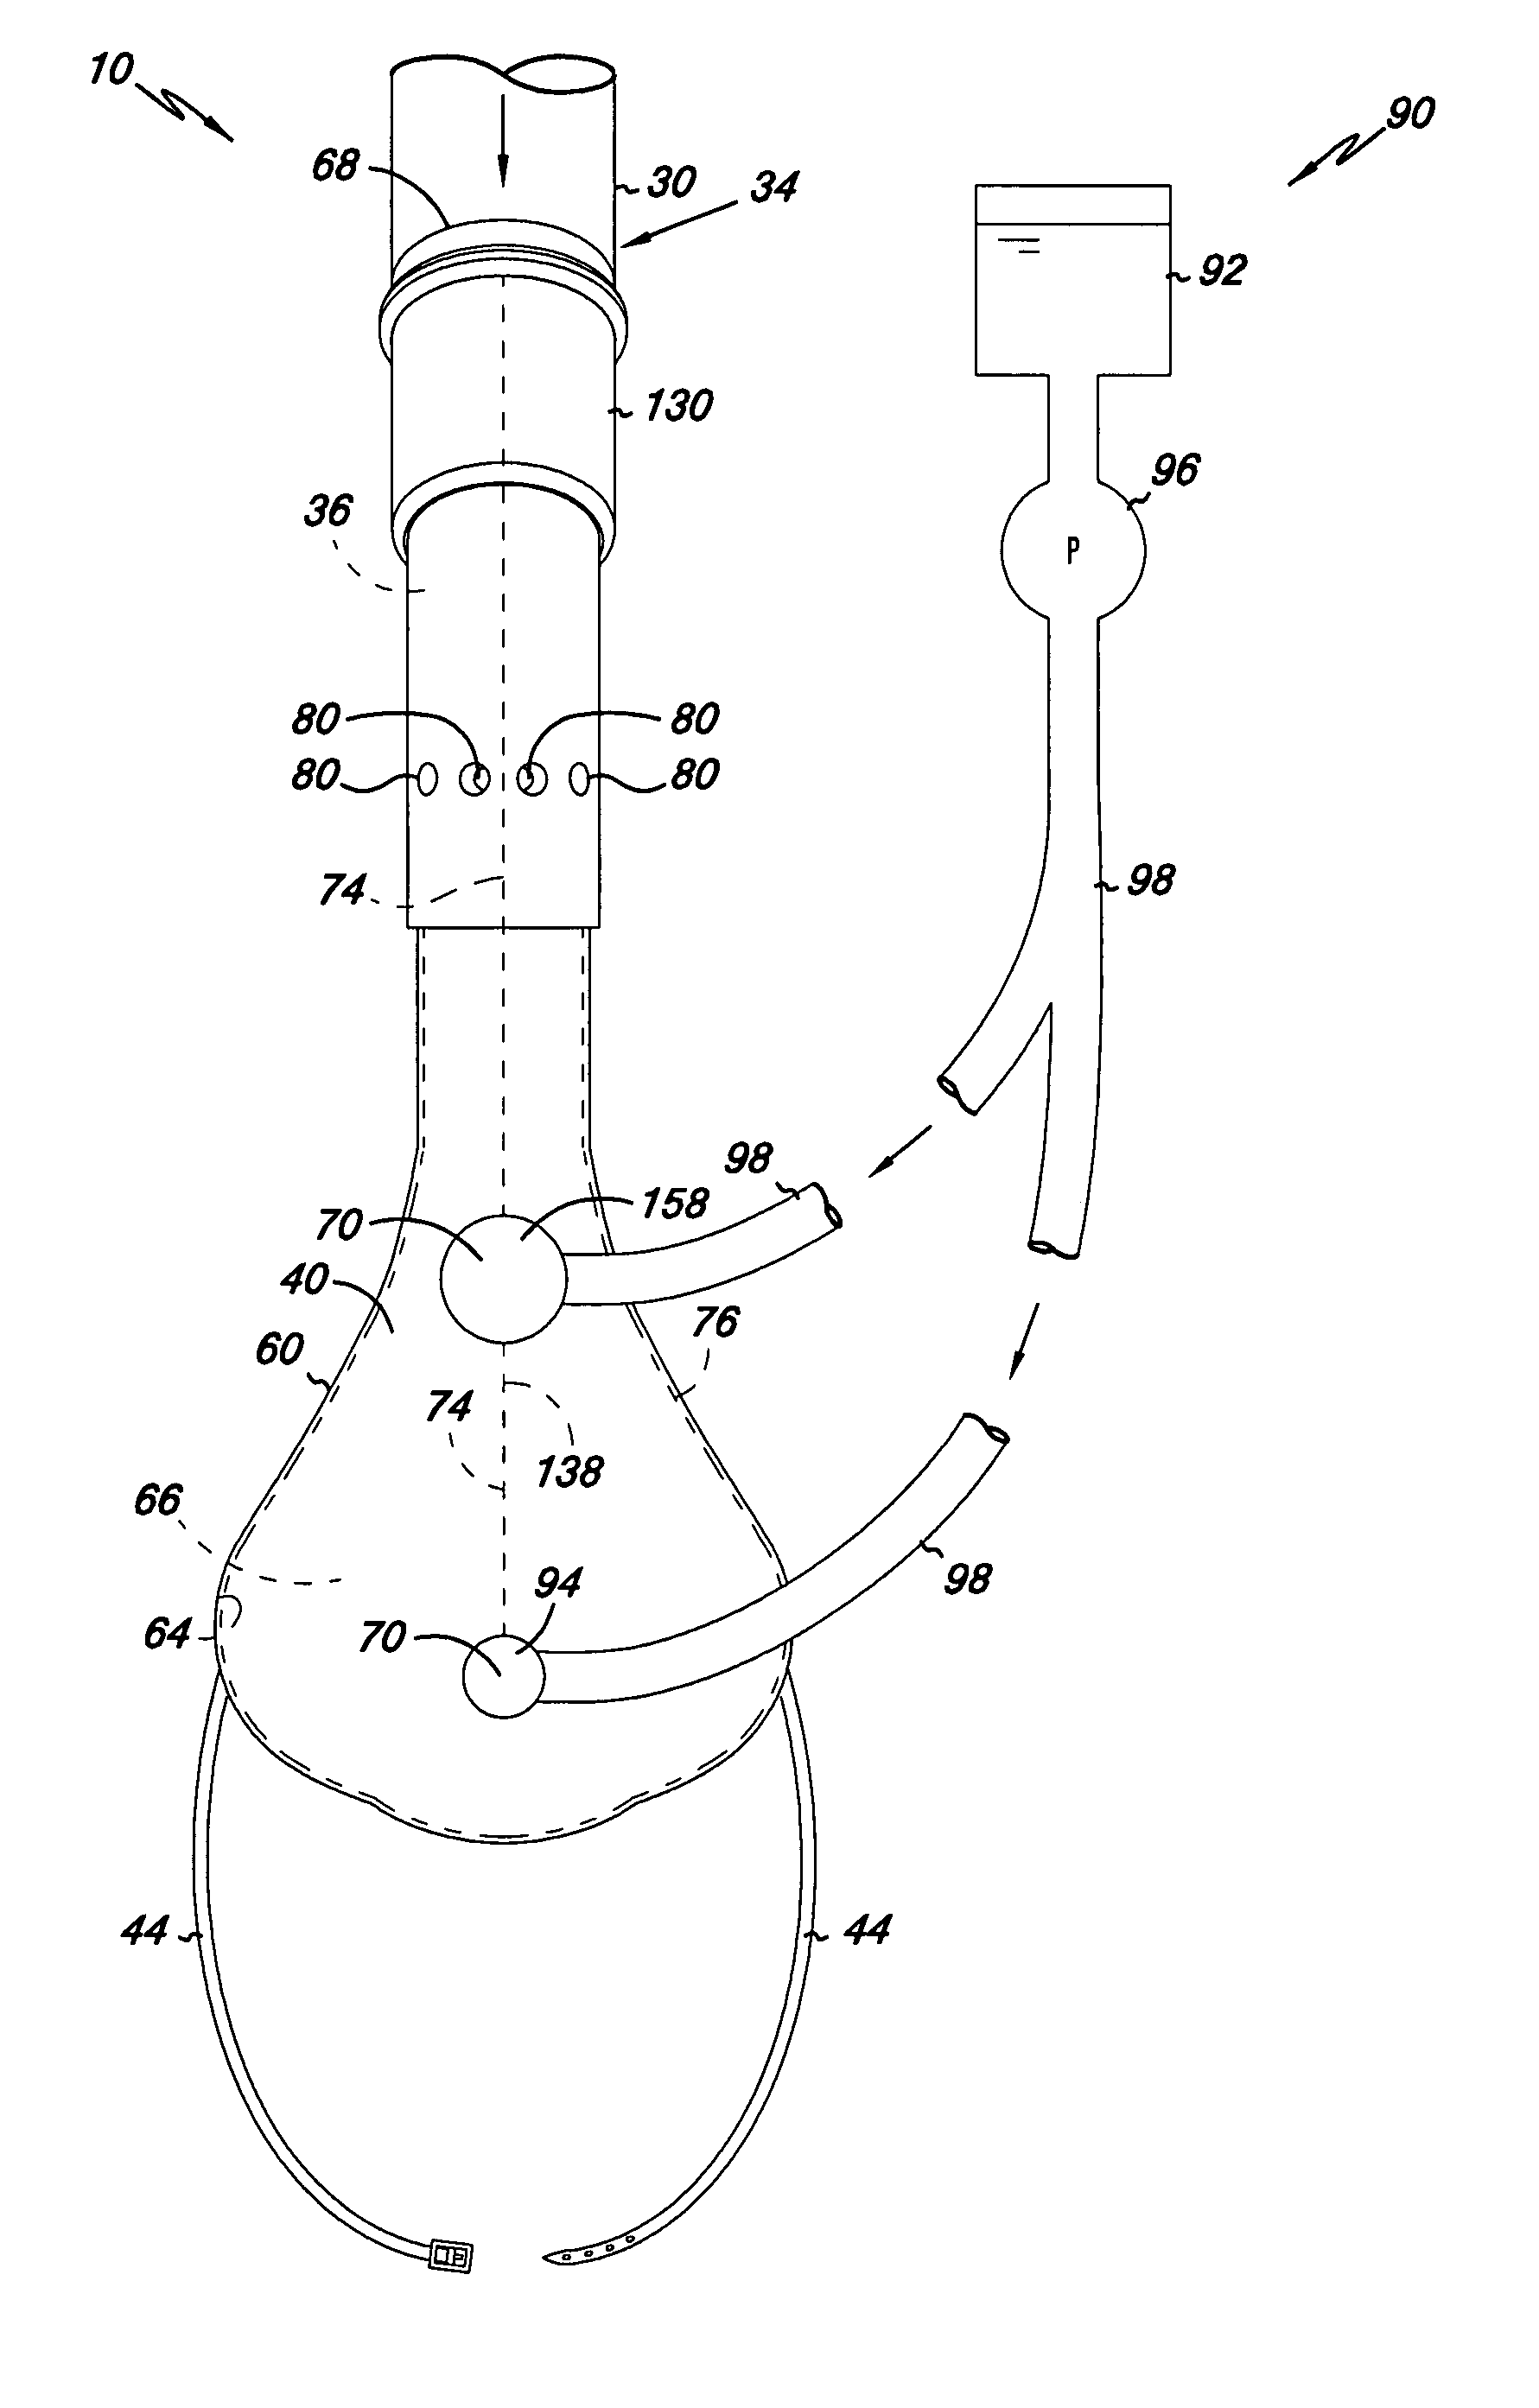 Apparatus and methods for providing humidity in respiratory therapy